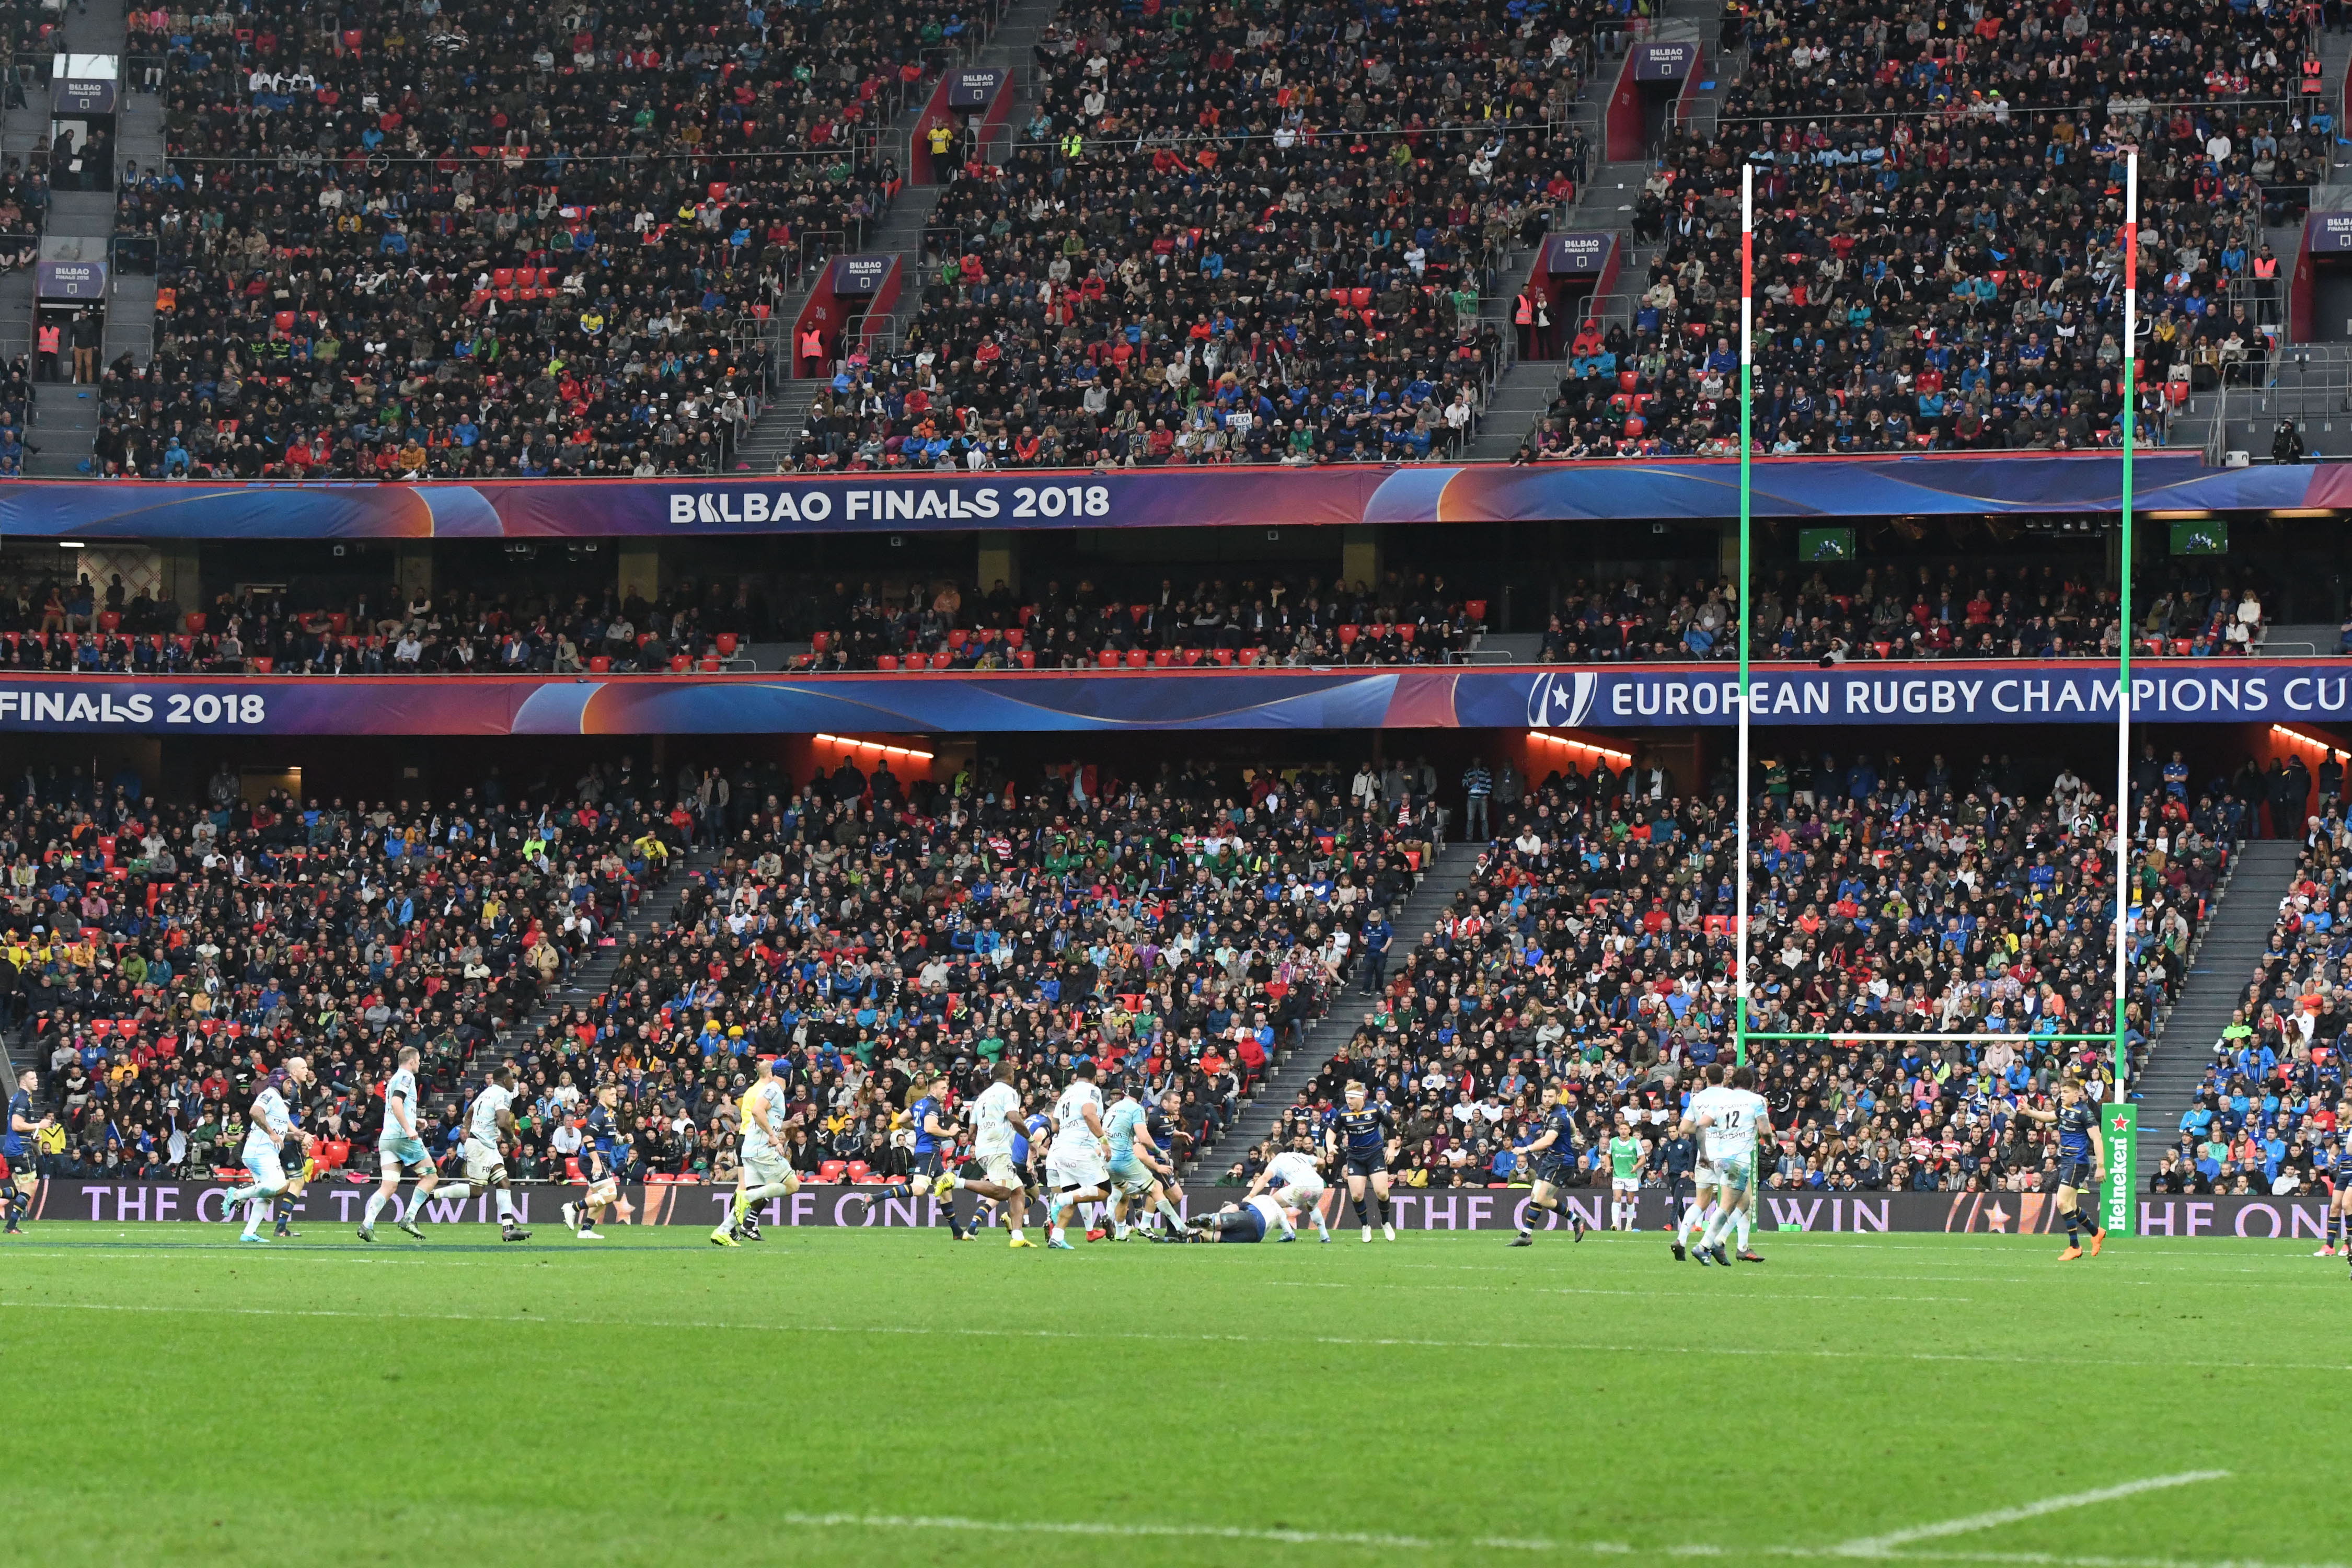 In May, Bilbao was the world capital of rugby. 